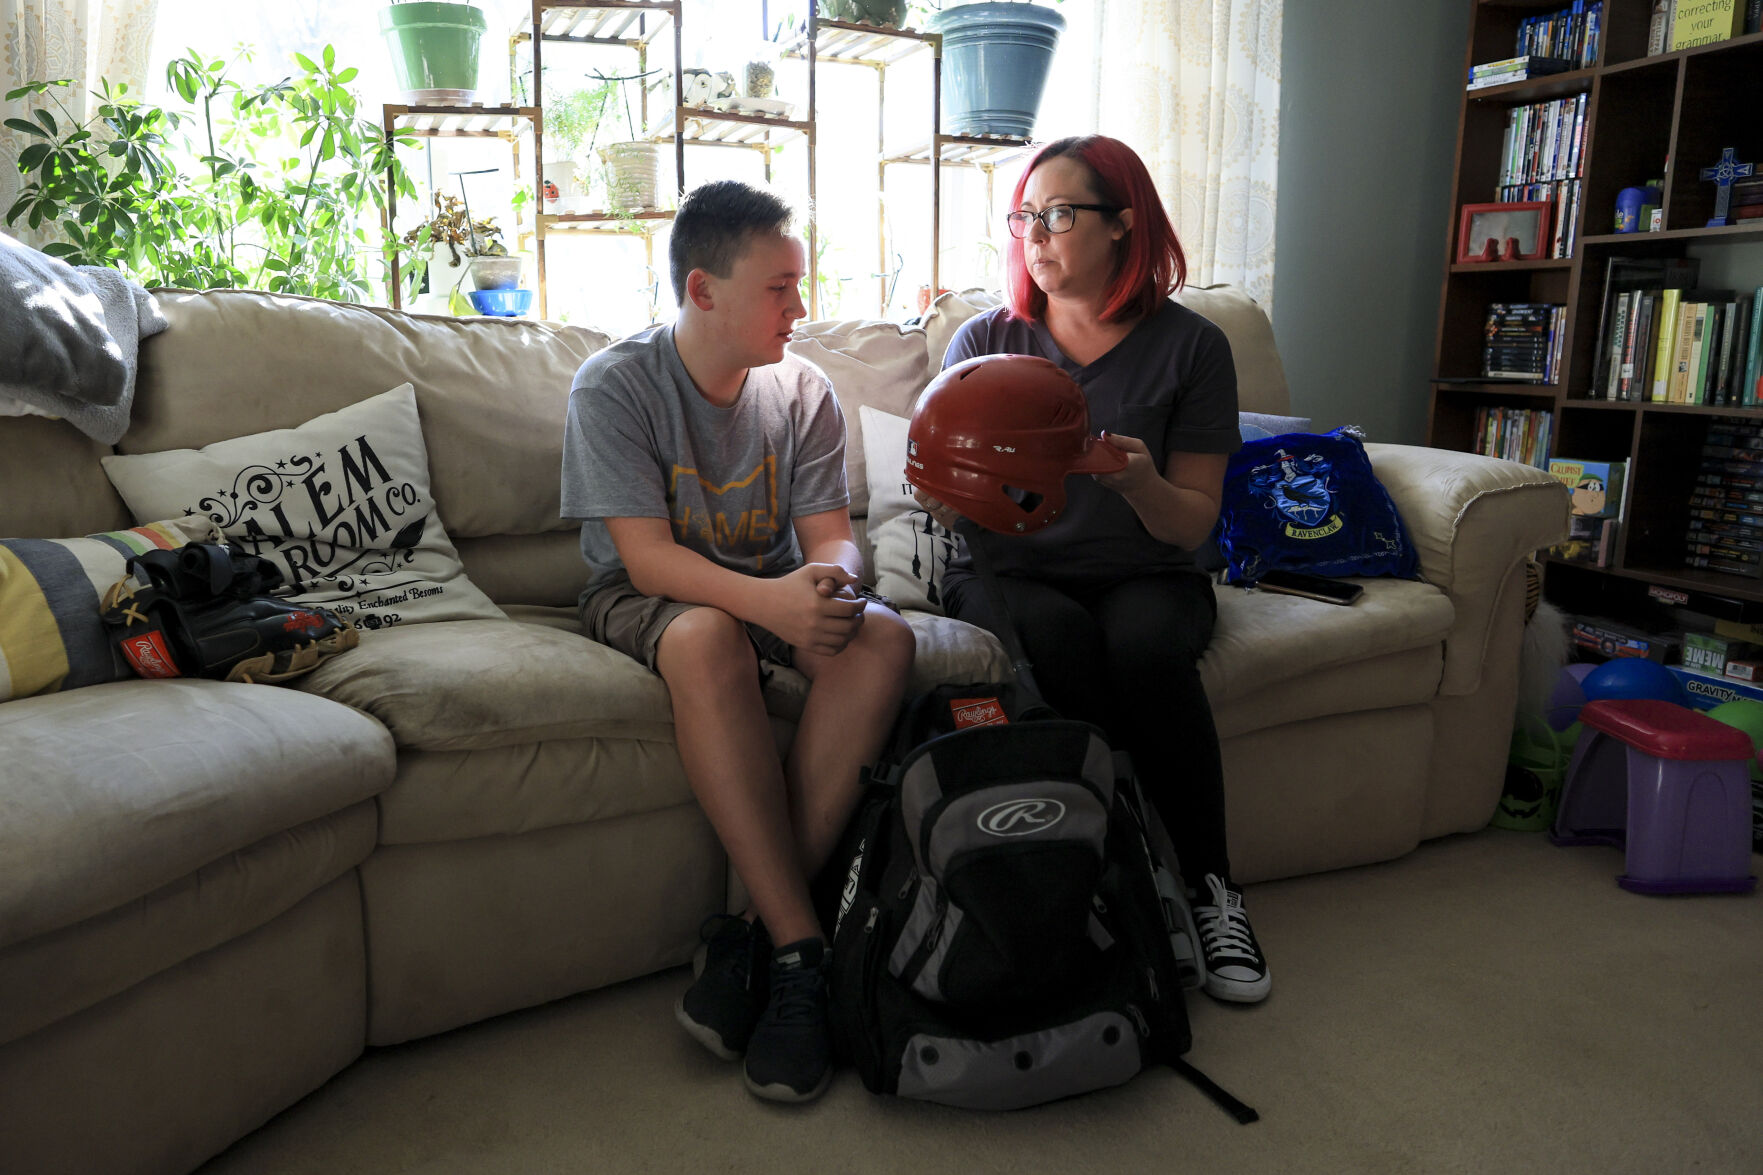 <p>Liam Kennedy, left, and his mother, Rachel, go through an equipment bag while being interviewed Friday, Oct. 28, 2022, in Monroe, Ohio. (AP Photo/Aaron Doster)</p>   PHOTO CREDIT: Aaron Doster - freelancer, FR171400 AP